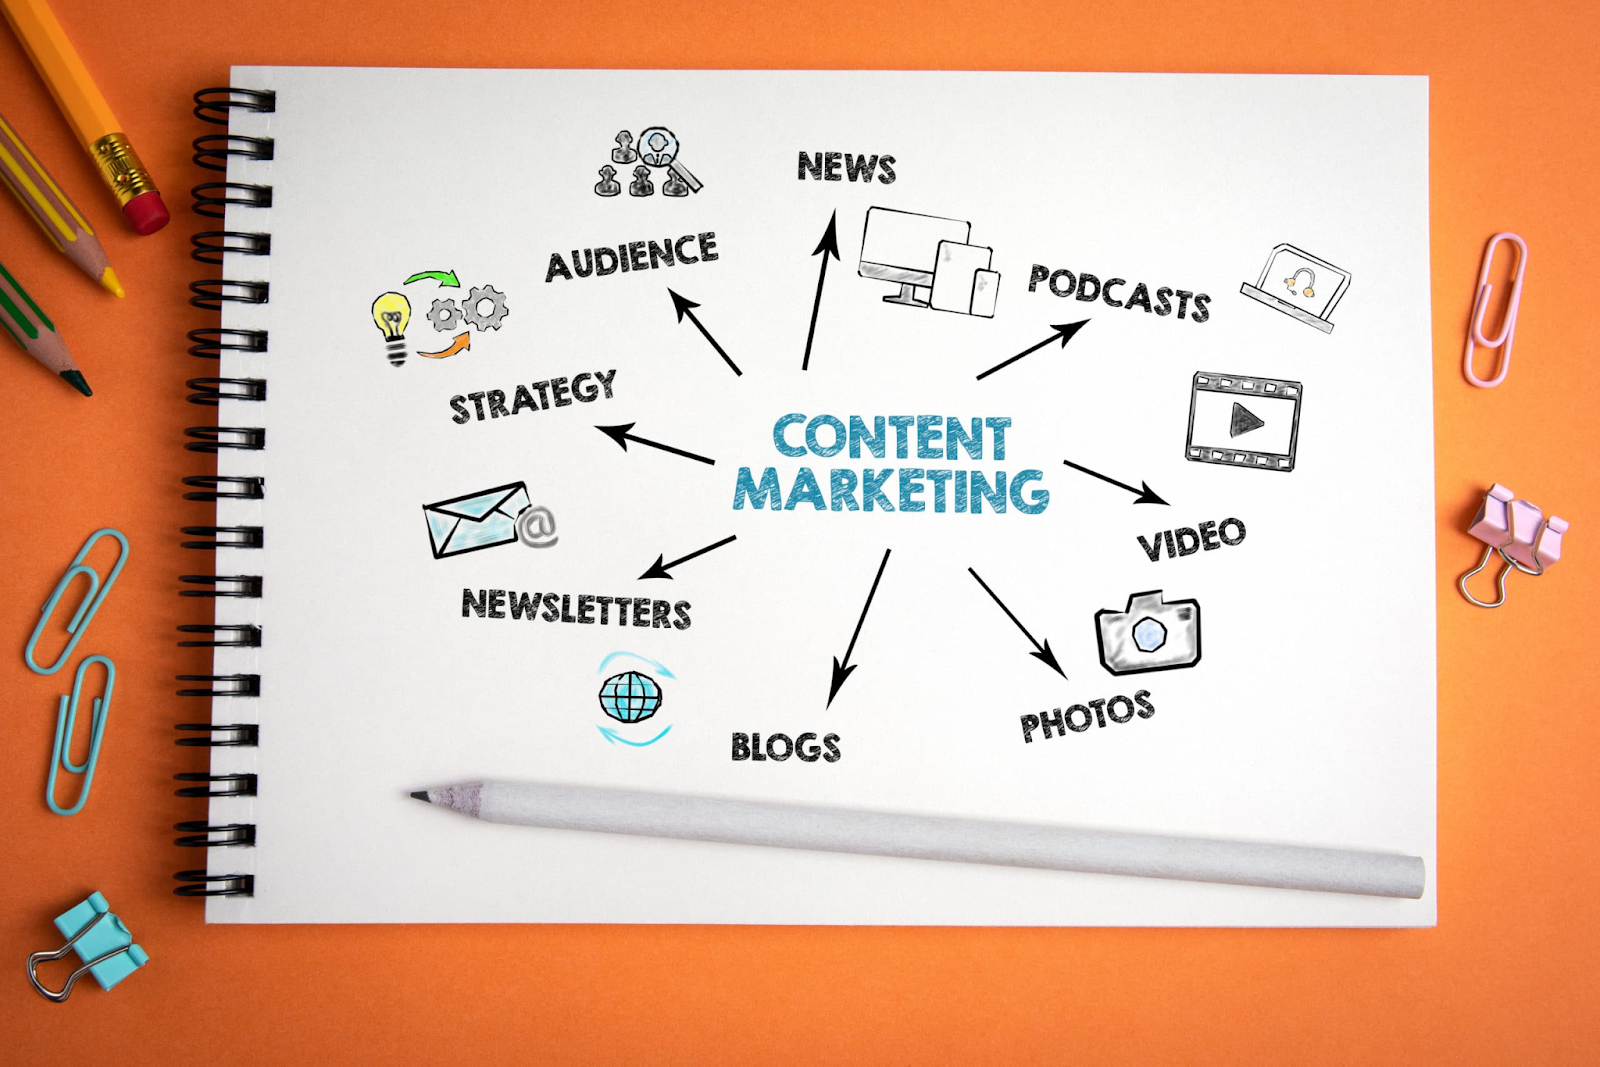 A visual guide on creating a content marketing strategy, providing step-by-step instructions.